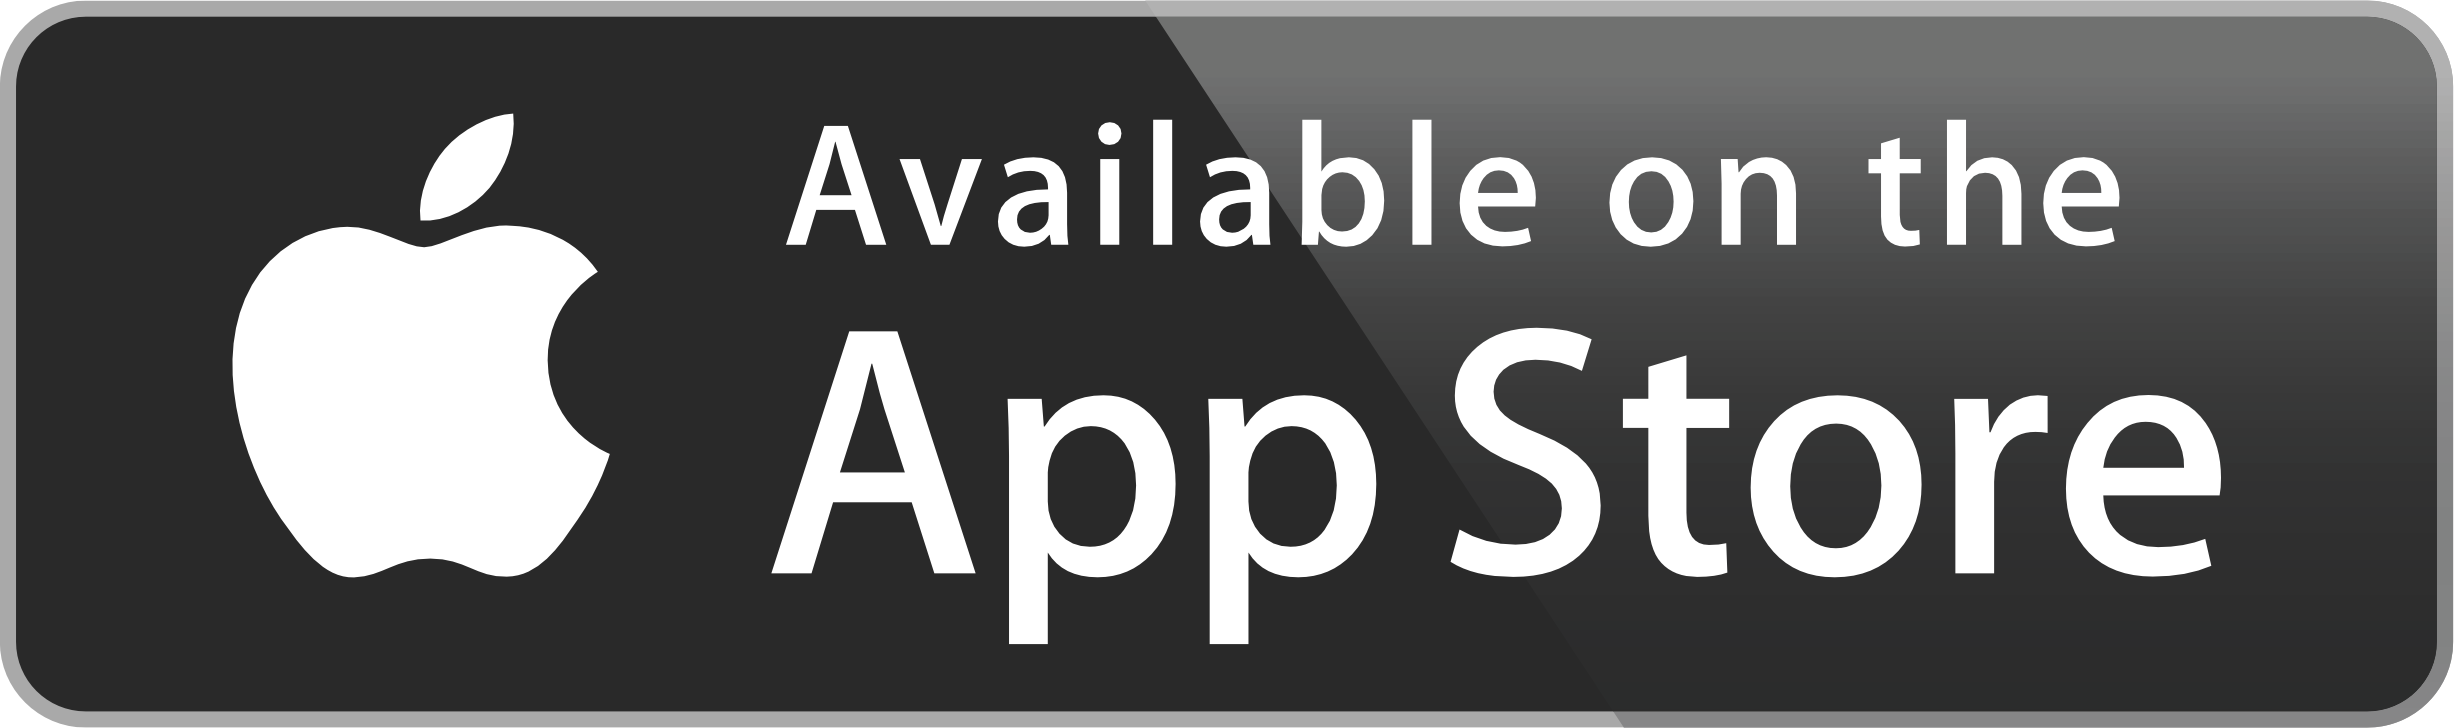 (Apple) Available on the App Store